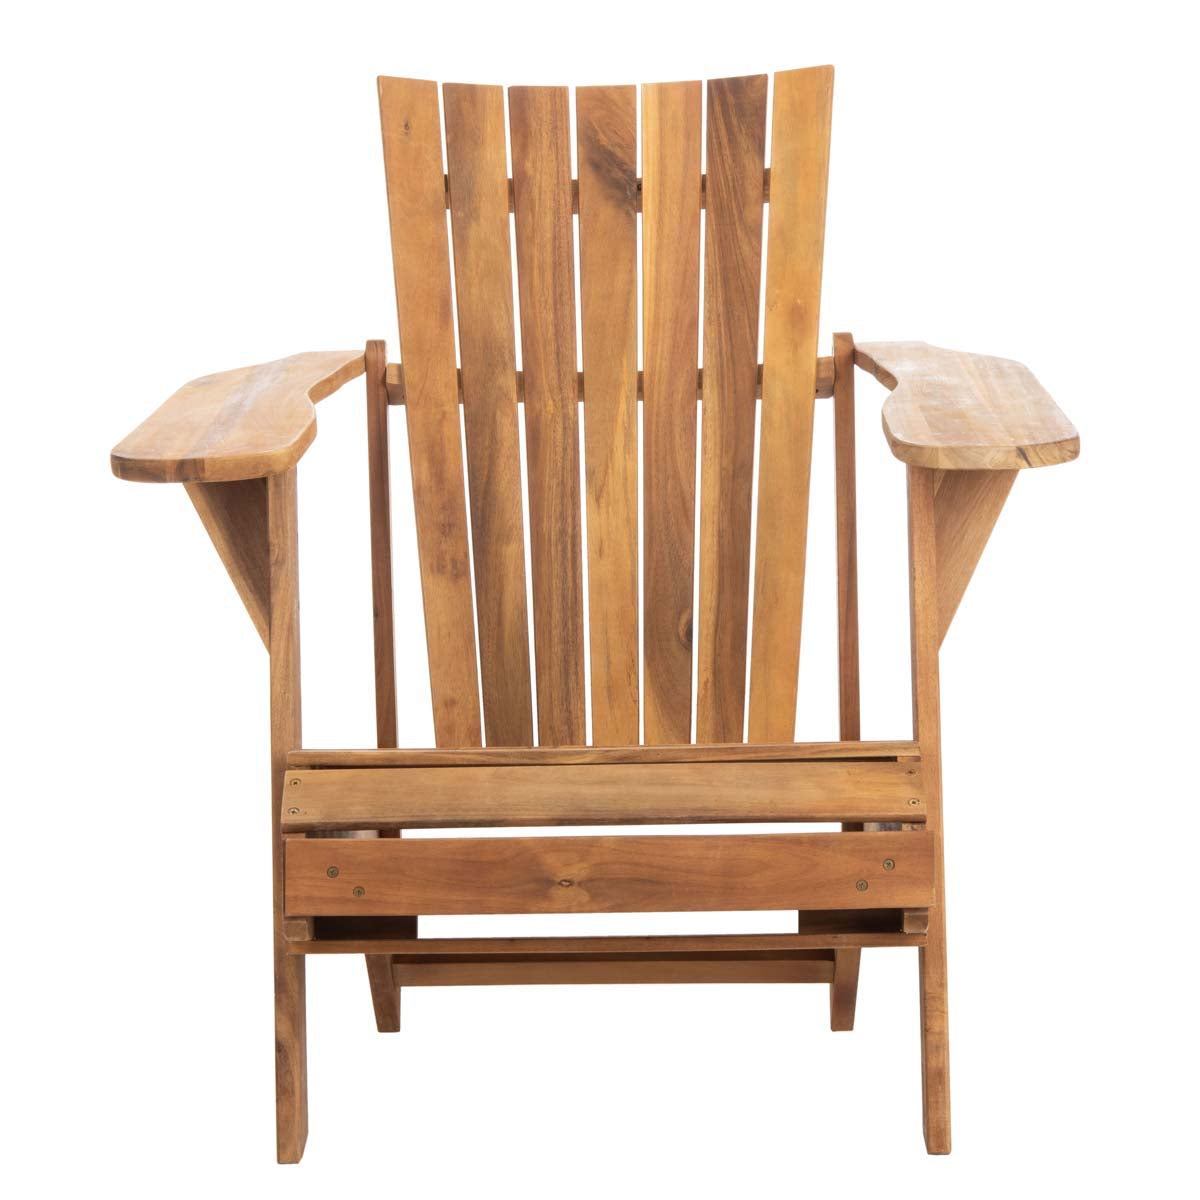 Safavieh Merlin Adirondack Chair With Retractable Footrest , PAT6760